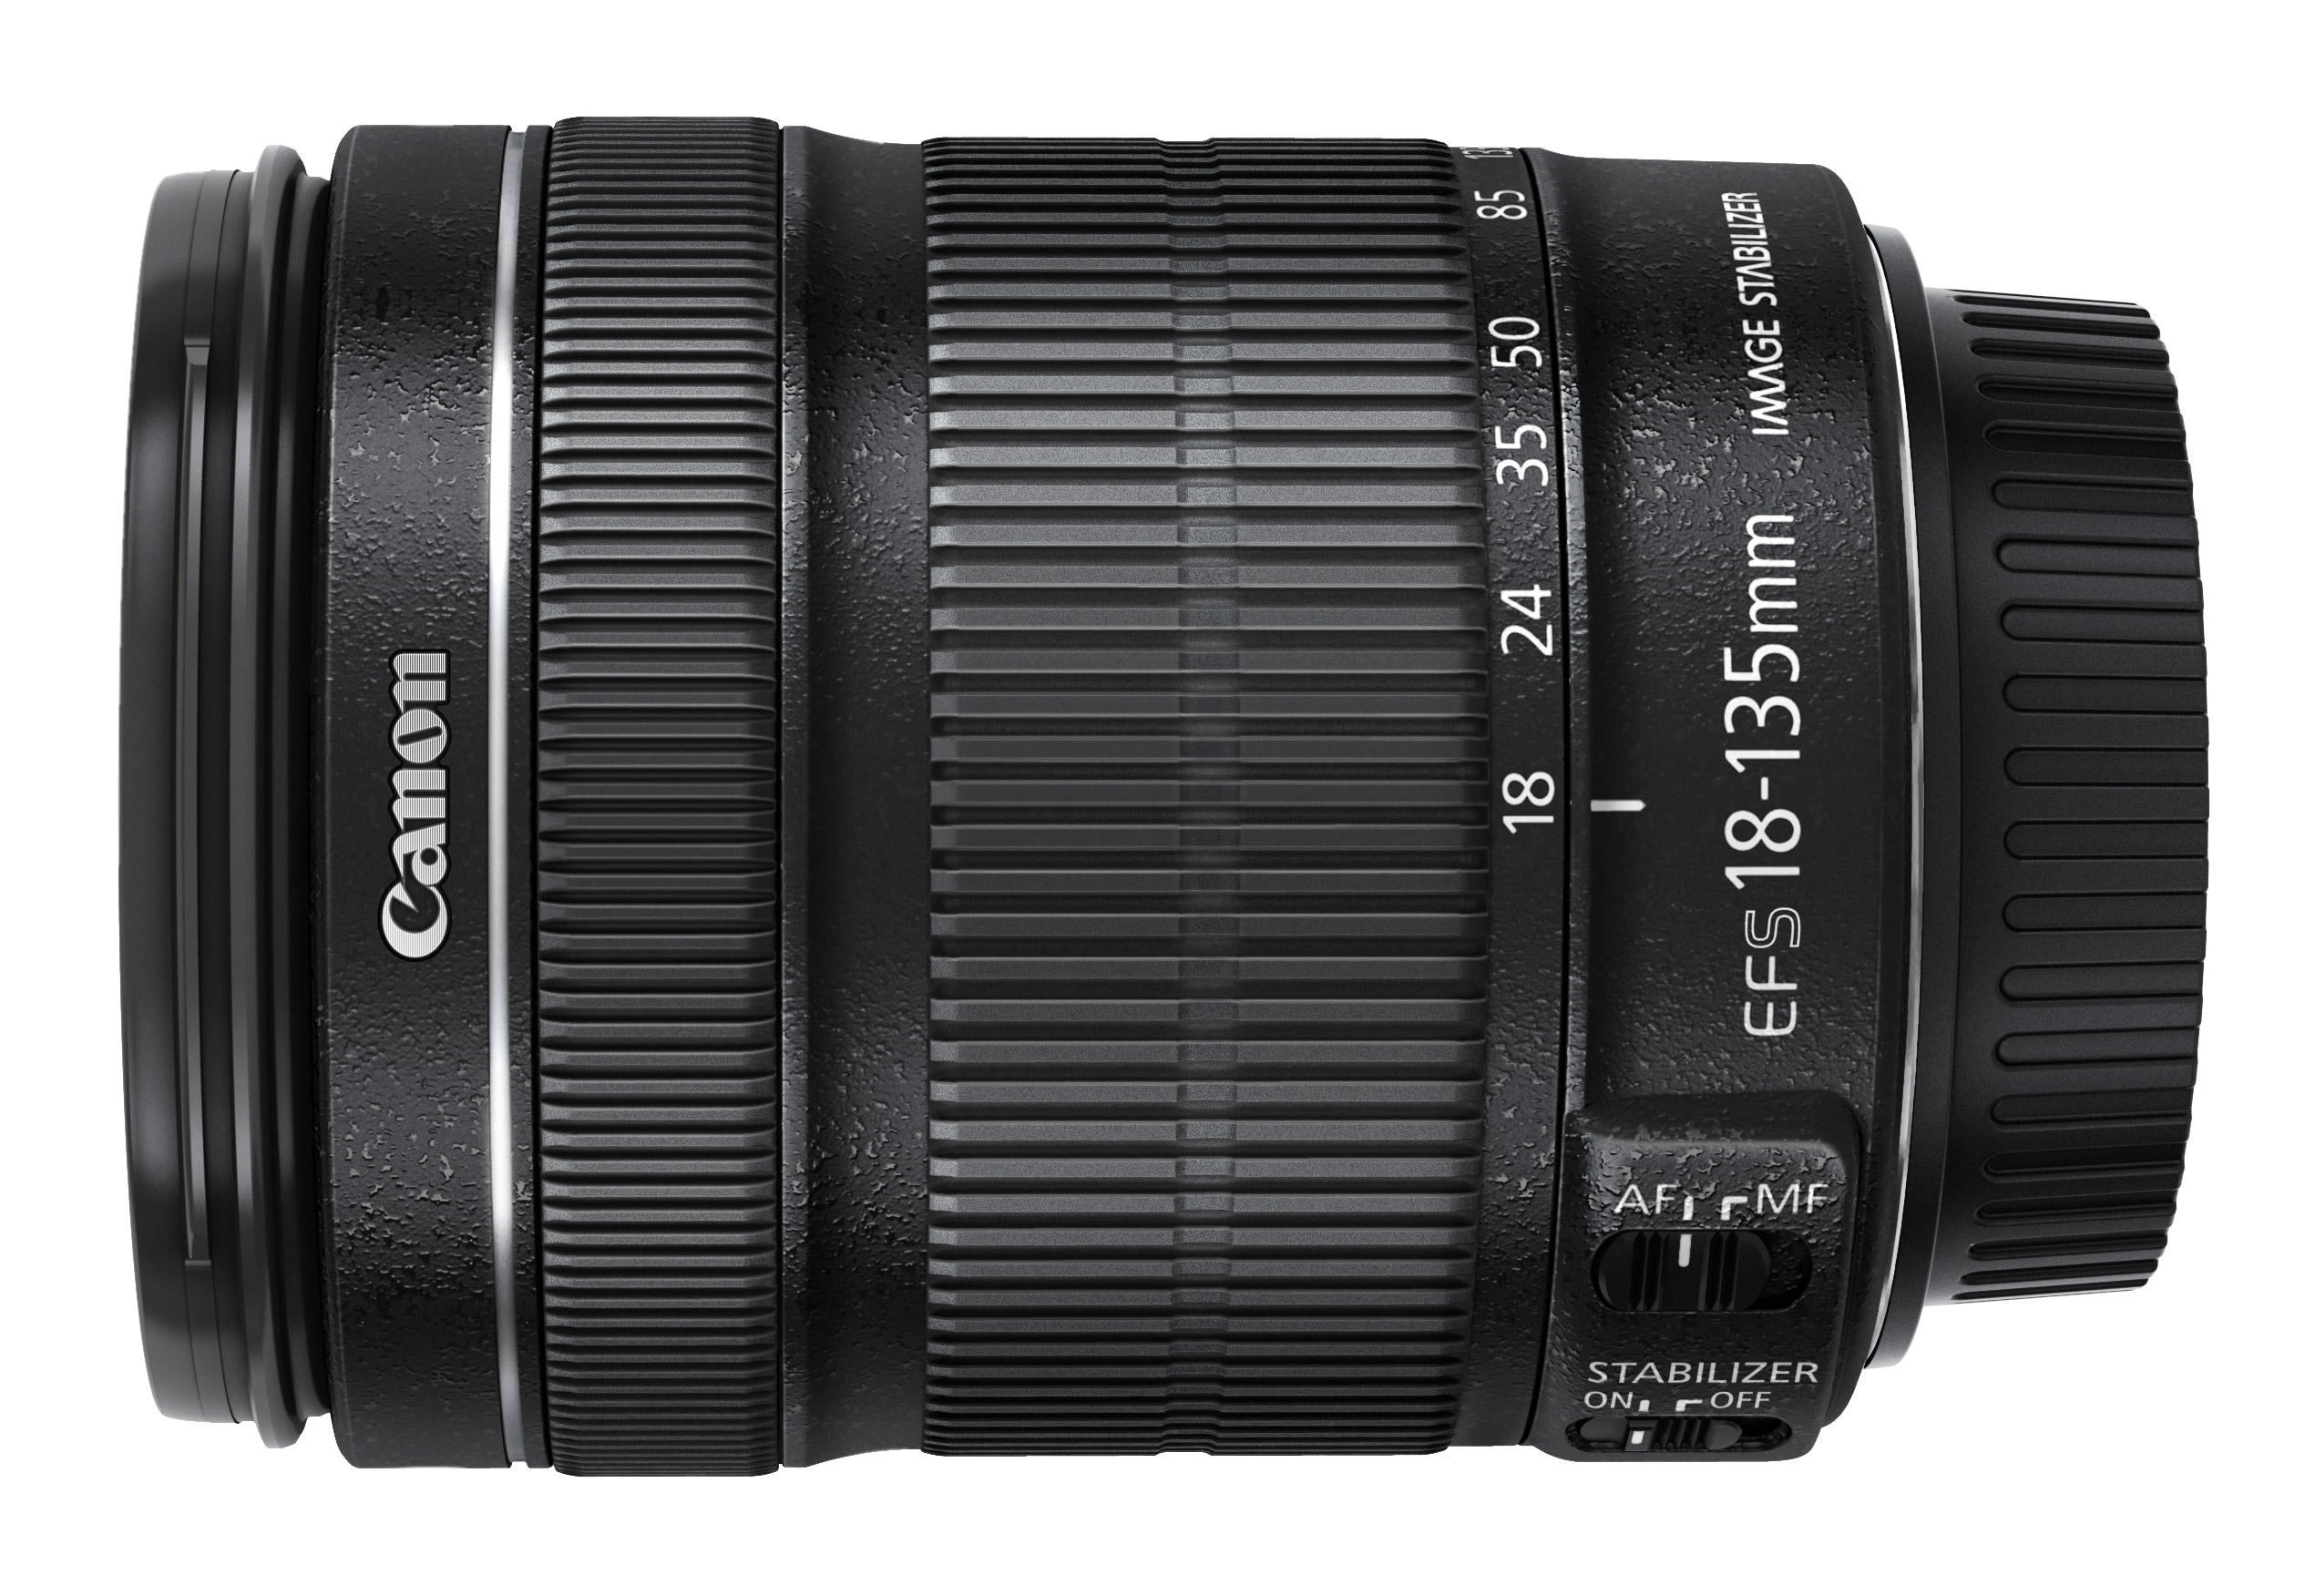 Canon EF-S 18-135mm f/3.5-5.6 IS STM